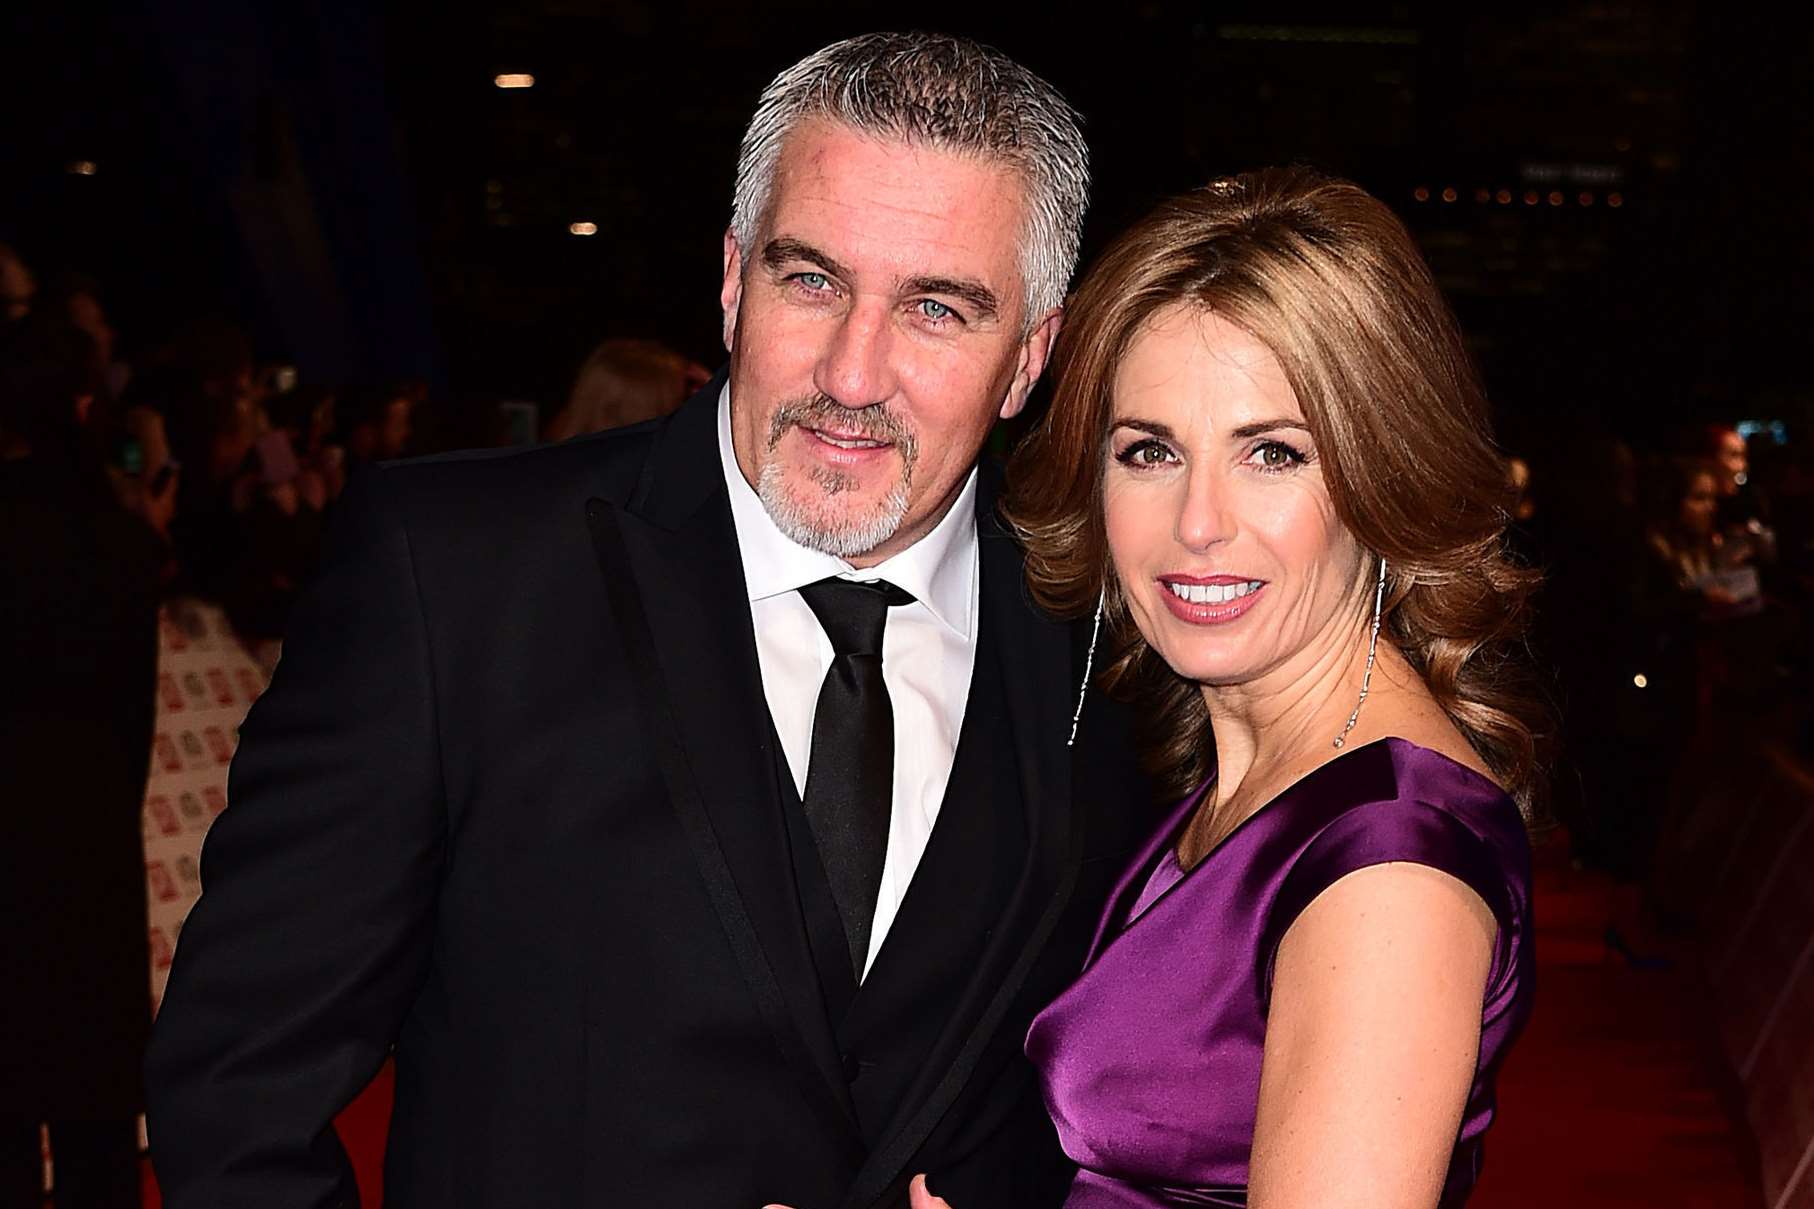 Paul Hollywood and wife Alexandra Hollywood arriving for the 2015 National Television Awards at the O2